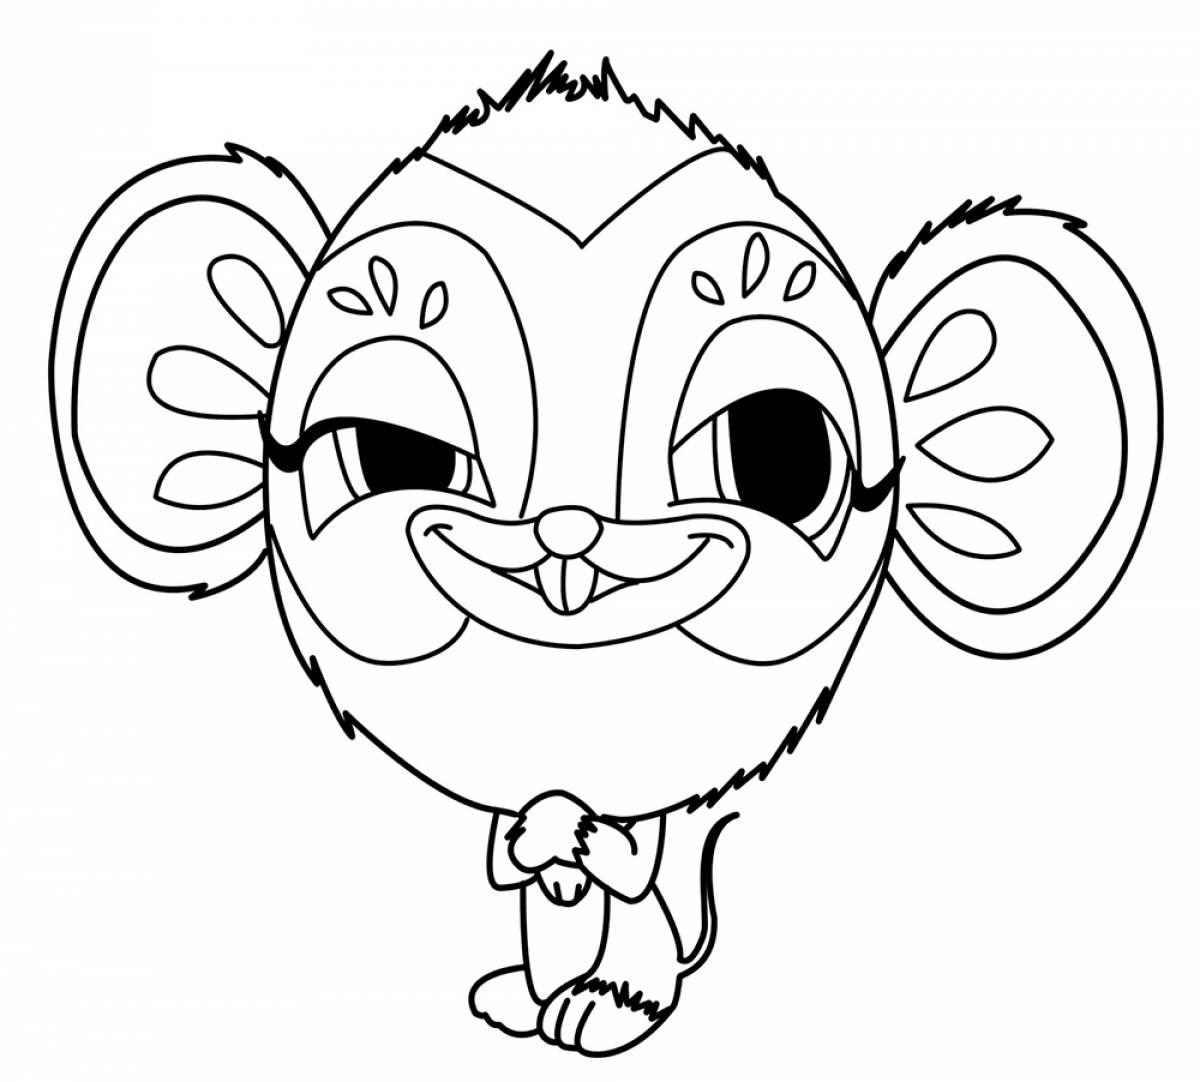 Zooble coloring page